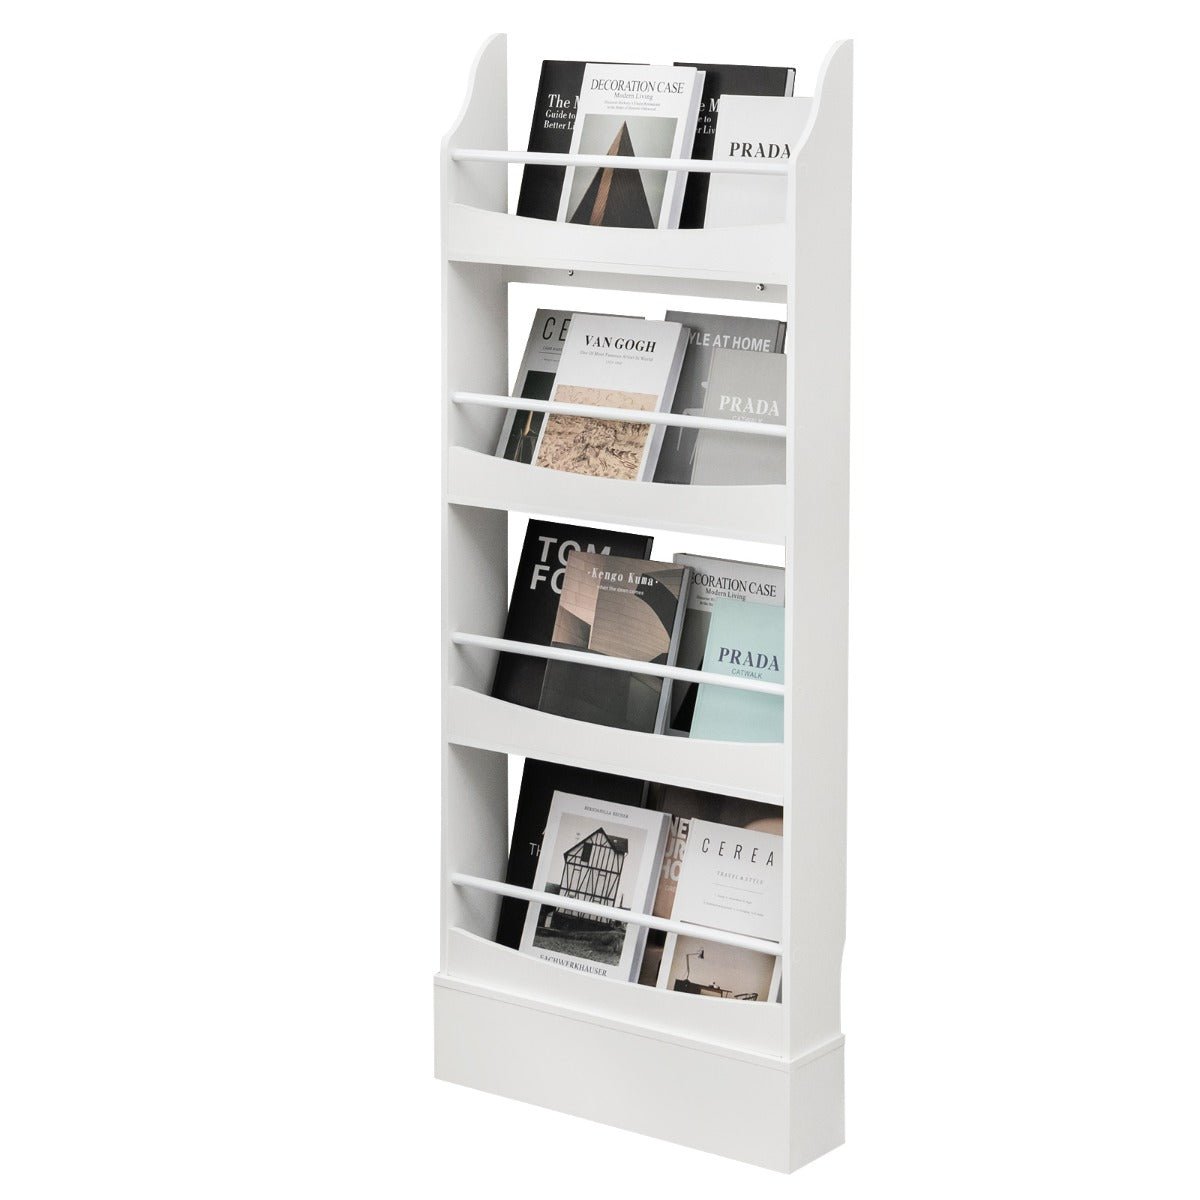 Child-Safe 4-Tier Bookcase with Anti-Tipping Kits & Guardrails